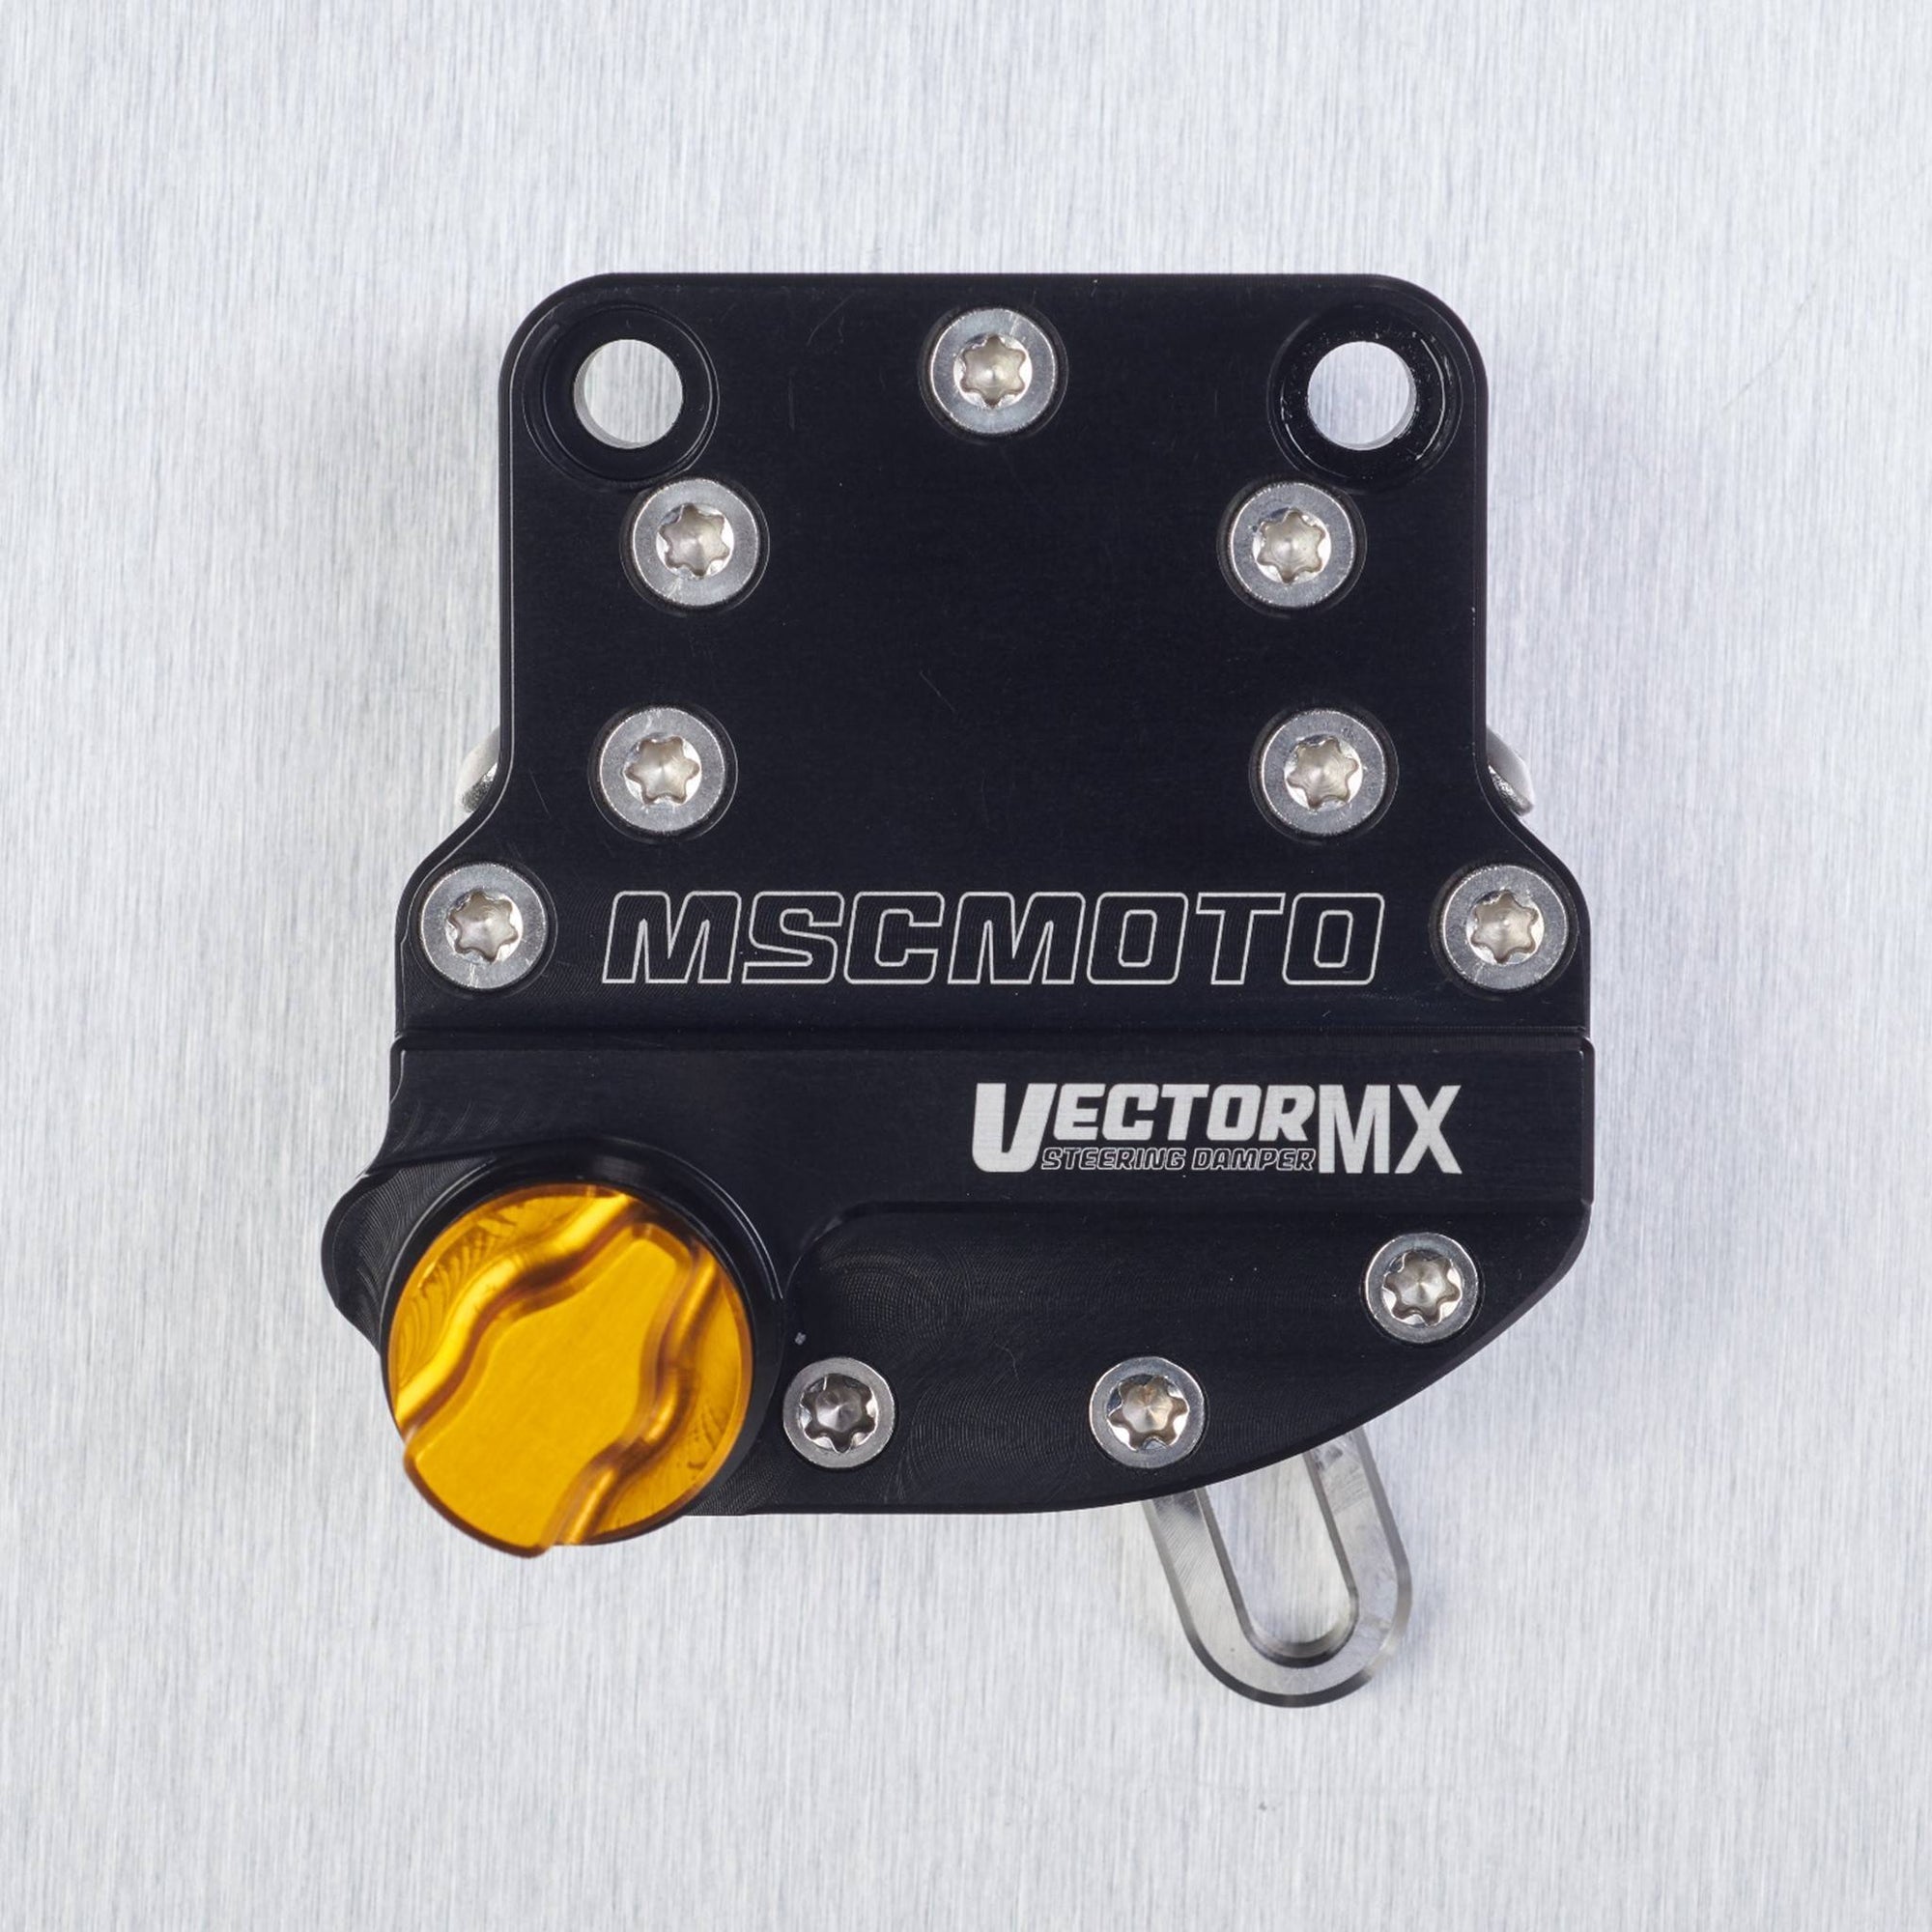 mscmotousa, VectorMX Steering Damper Kit "Down Under" Mount (VEC0012) - YAMAHA YZ65, VEC0012, vectormx, yamaha, yamaha-2018-yz65-esi3965279, , Imported and distributed in North & South America by Lindeco Genuine Powersports.